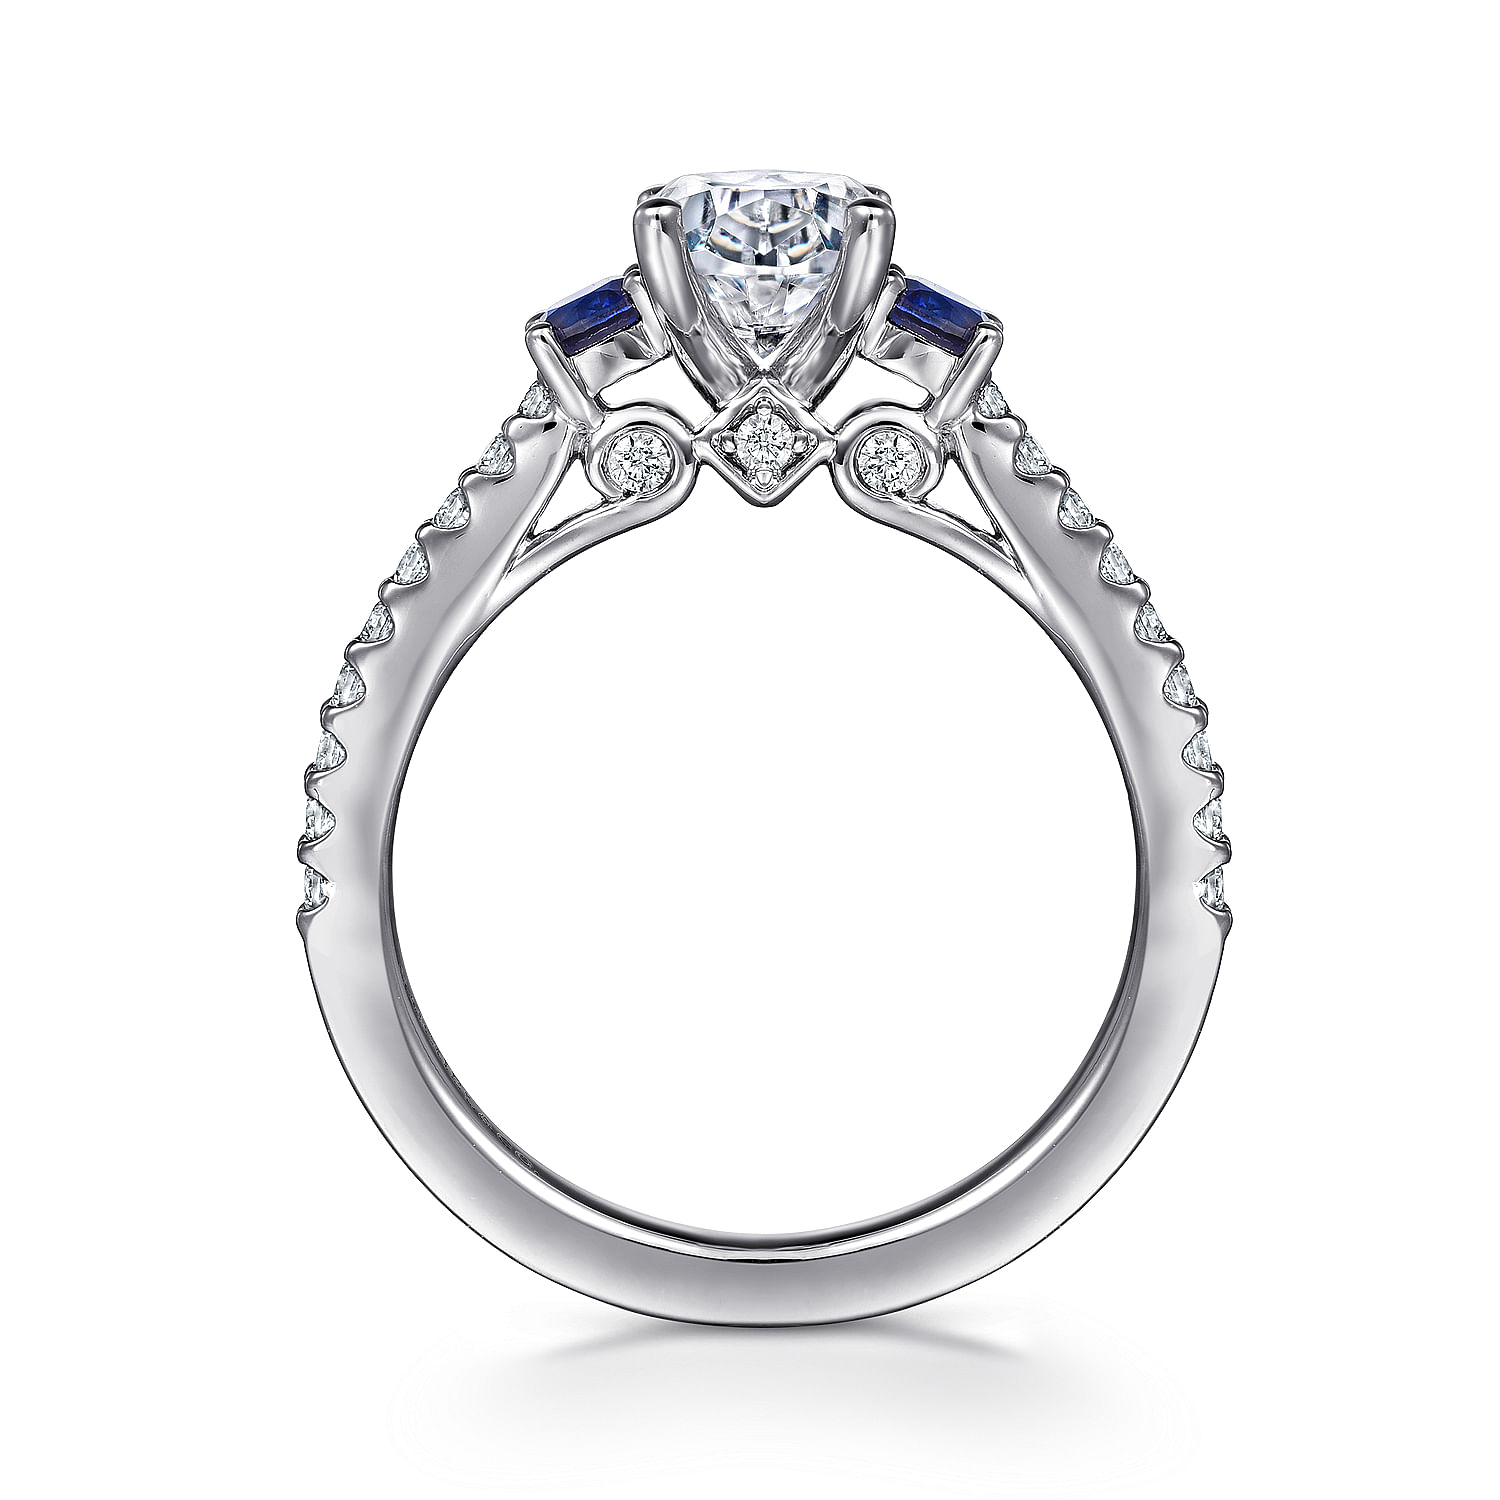 14K White Gold Oval Three Stone Sapphire and Diamond Engagement Ring